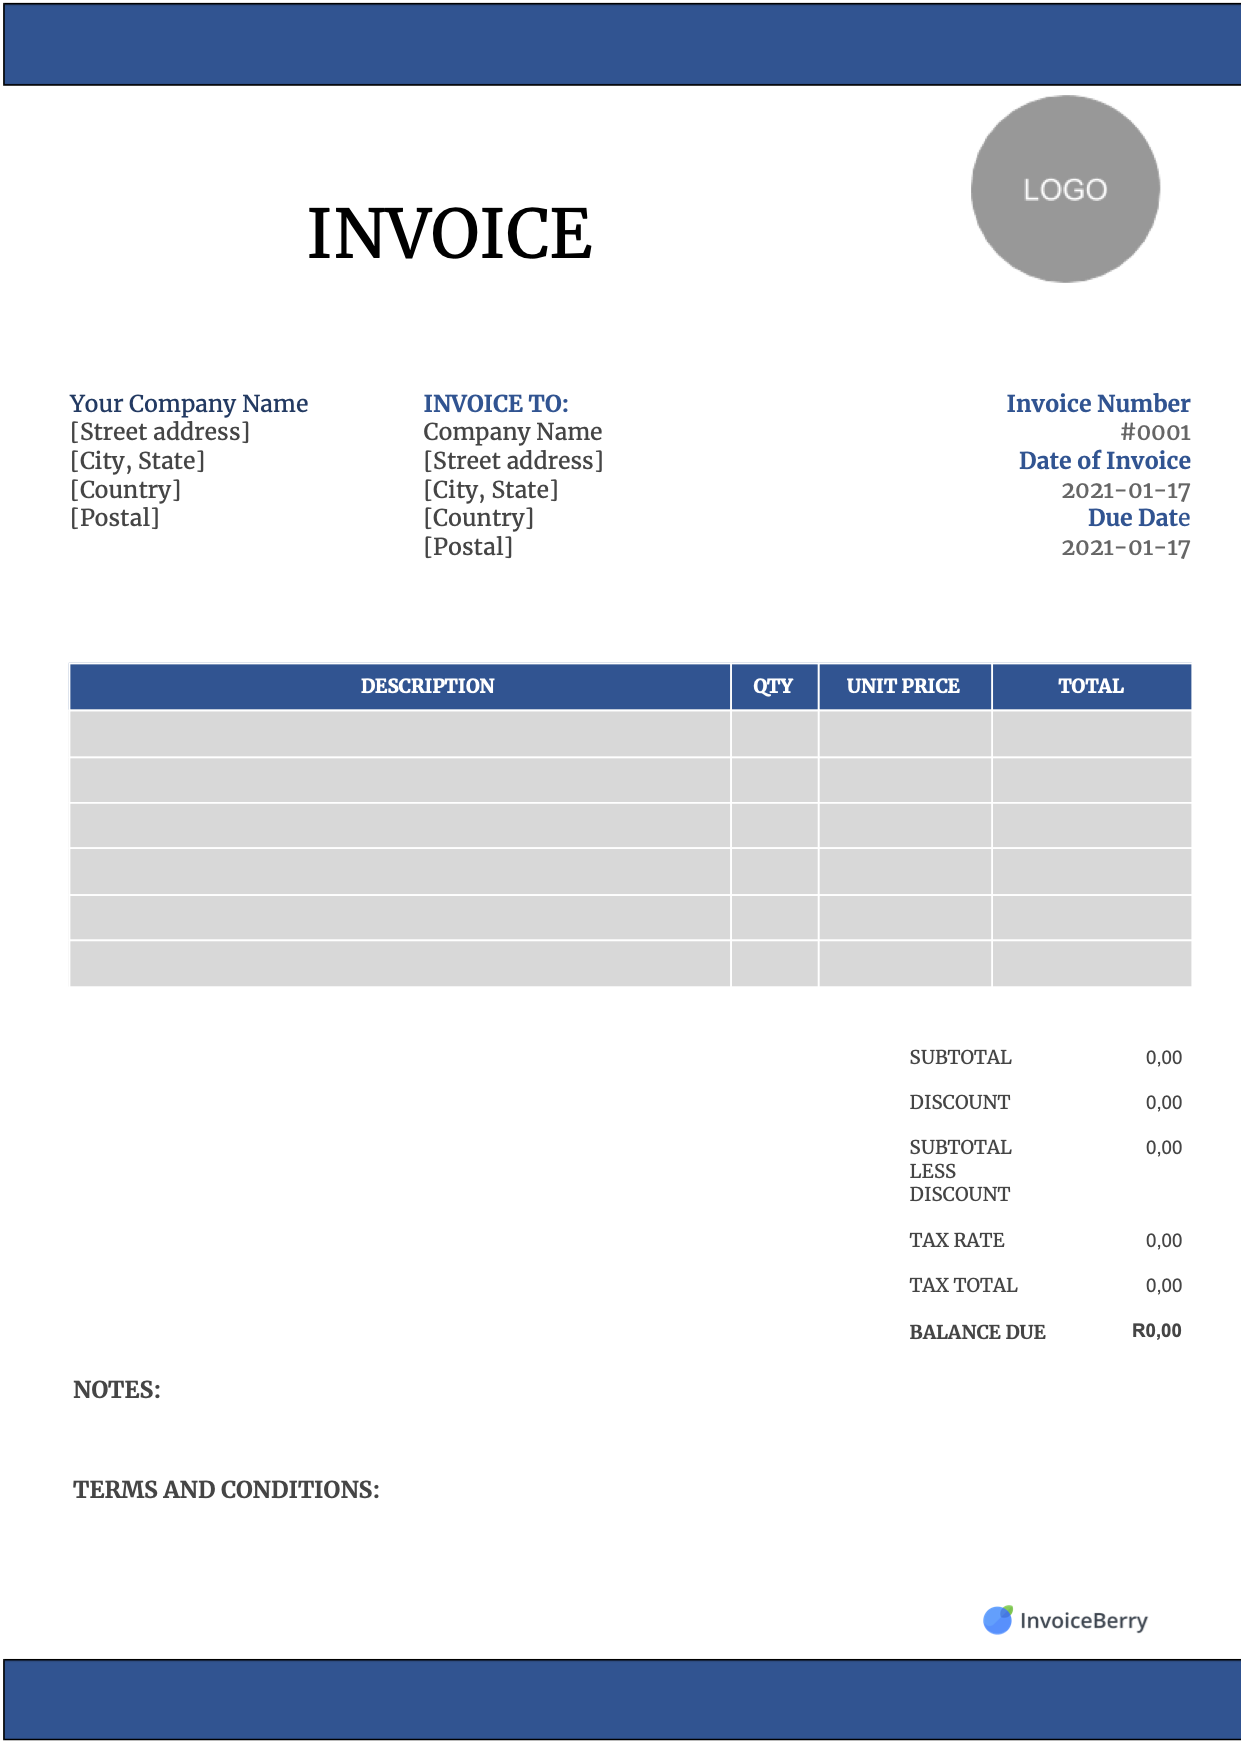 Free Invoice Templates Download - All Formats and Industries With Regard To Invoice Template Xls Free Download